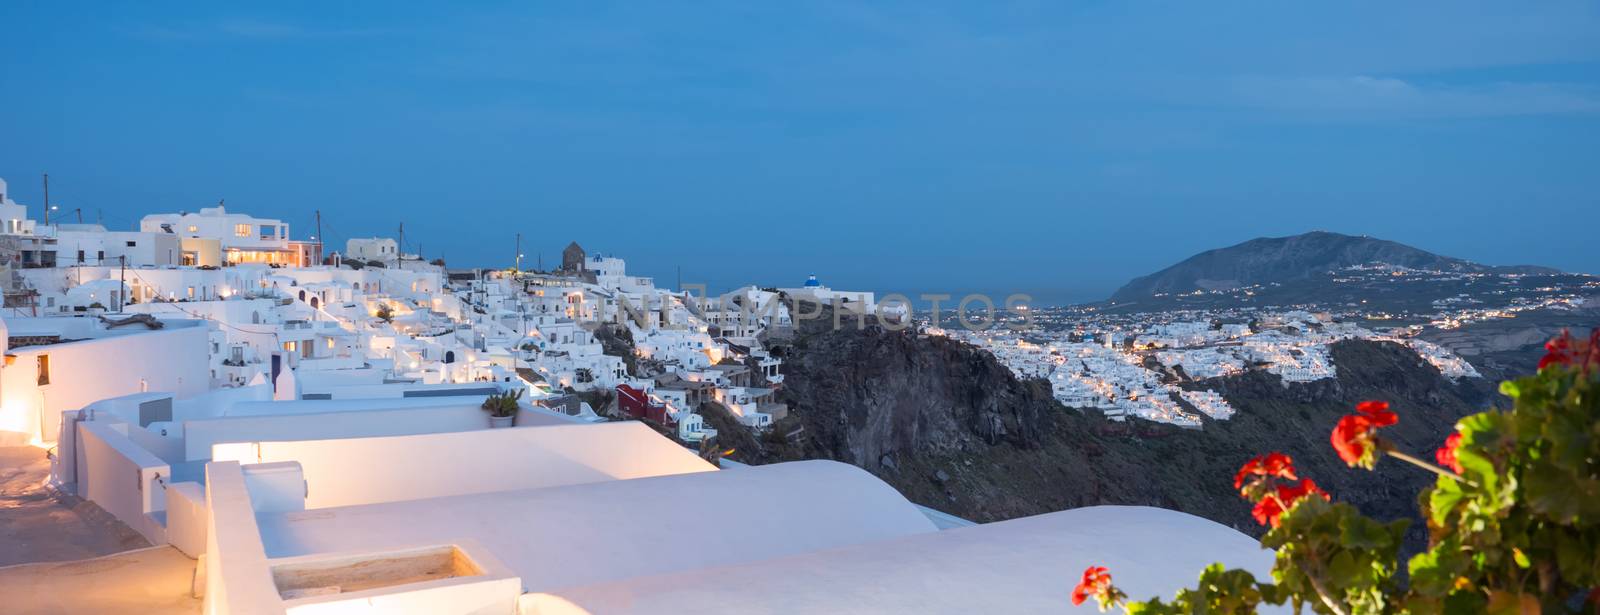 View of Oia in Santorini island by smoxx